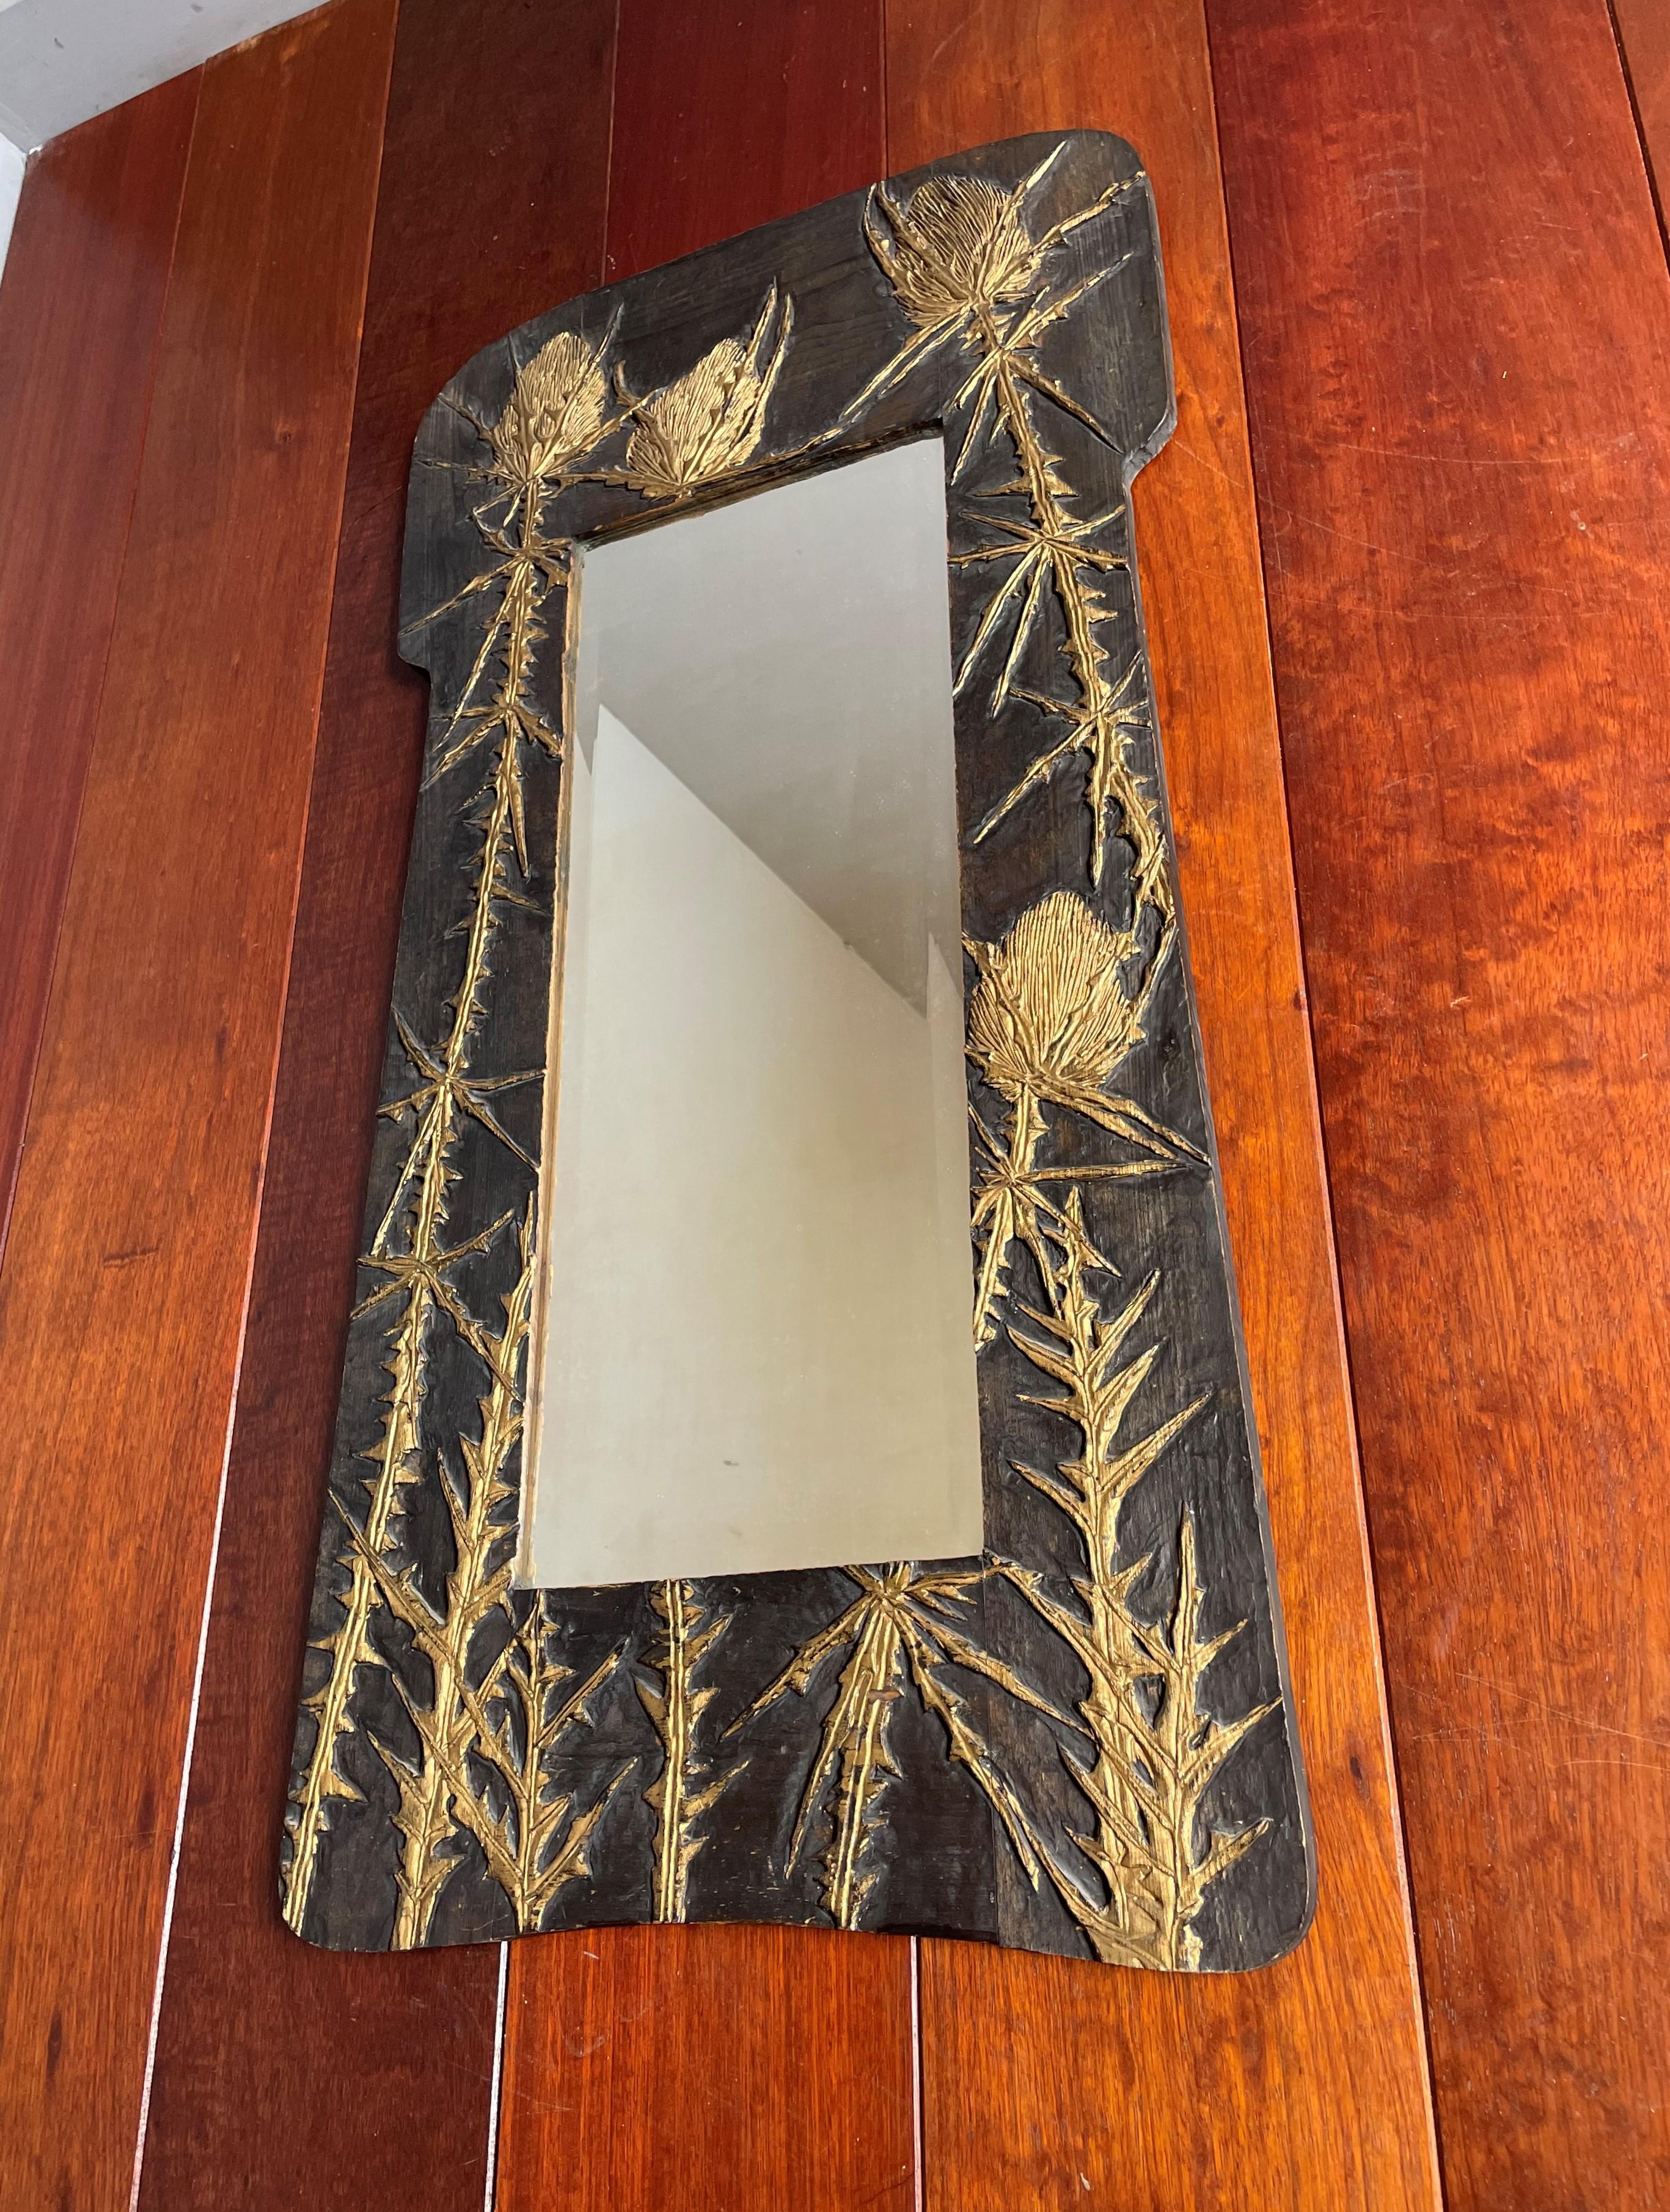 Striking wall mirror with handcarved 'blue thistles'.

Via one of our foreign contacts we recently purchased this perfectly realistic thistle sculptures wall mirror. This all handcarved wooden frame displays a group of blue thistles (as they are